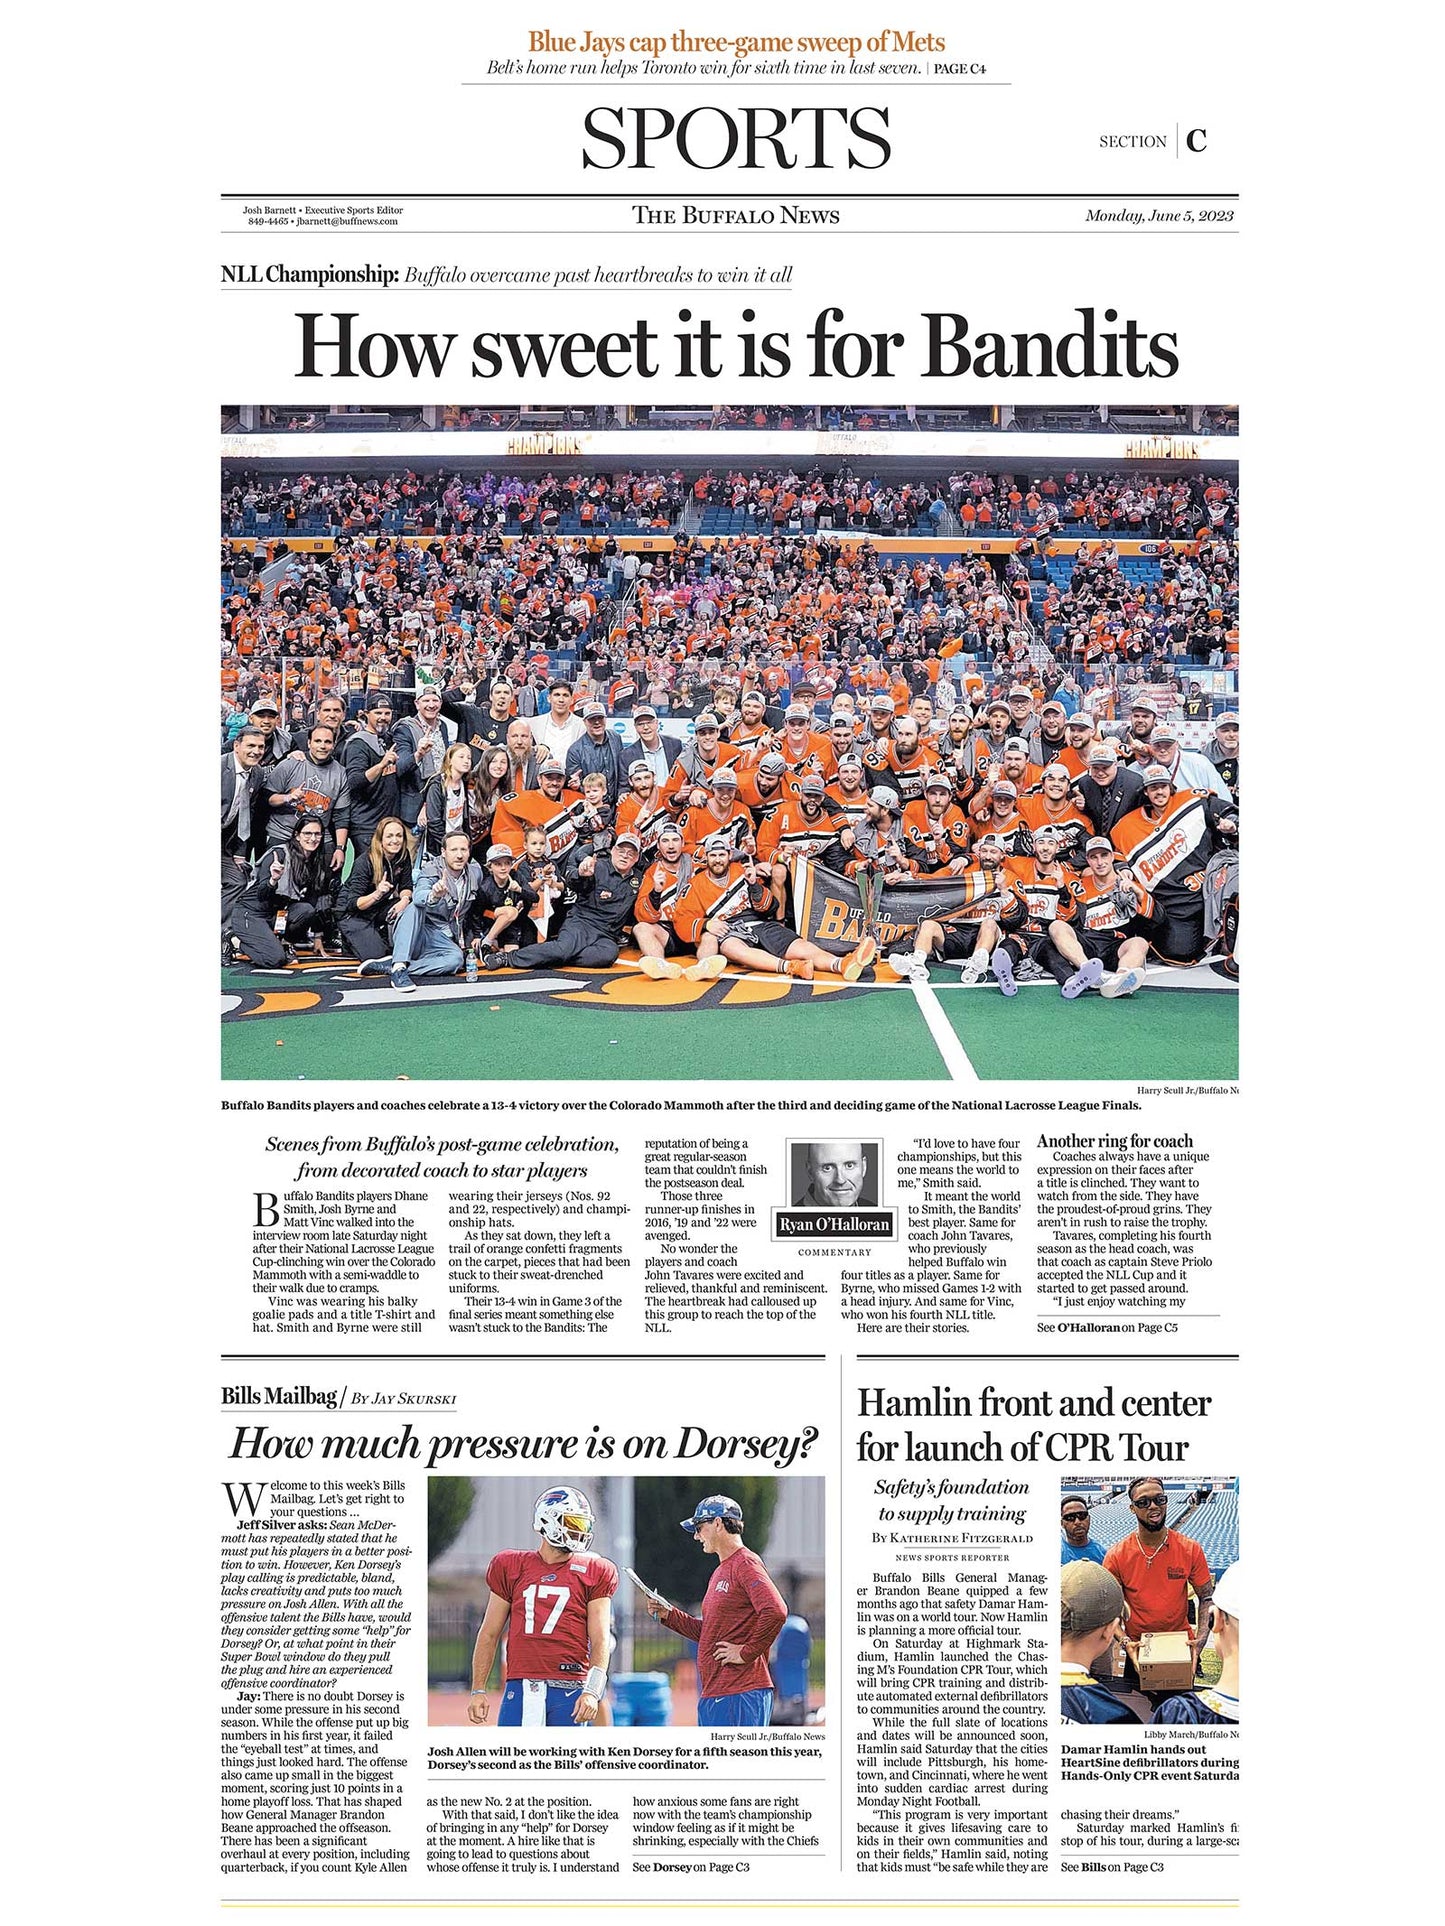 Headlines In History - How sweet it is for Bandits